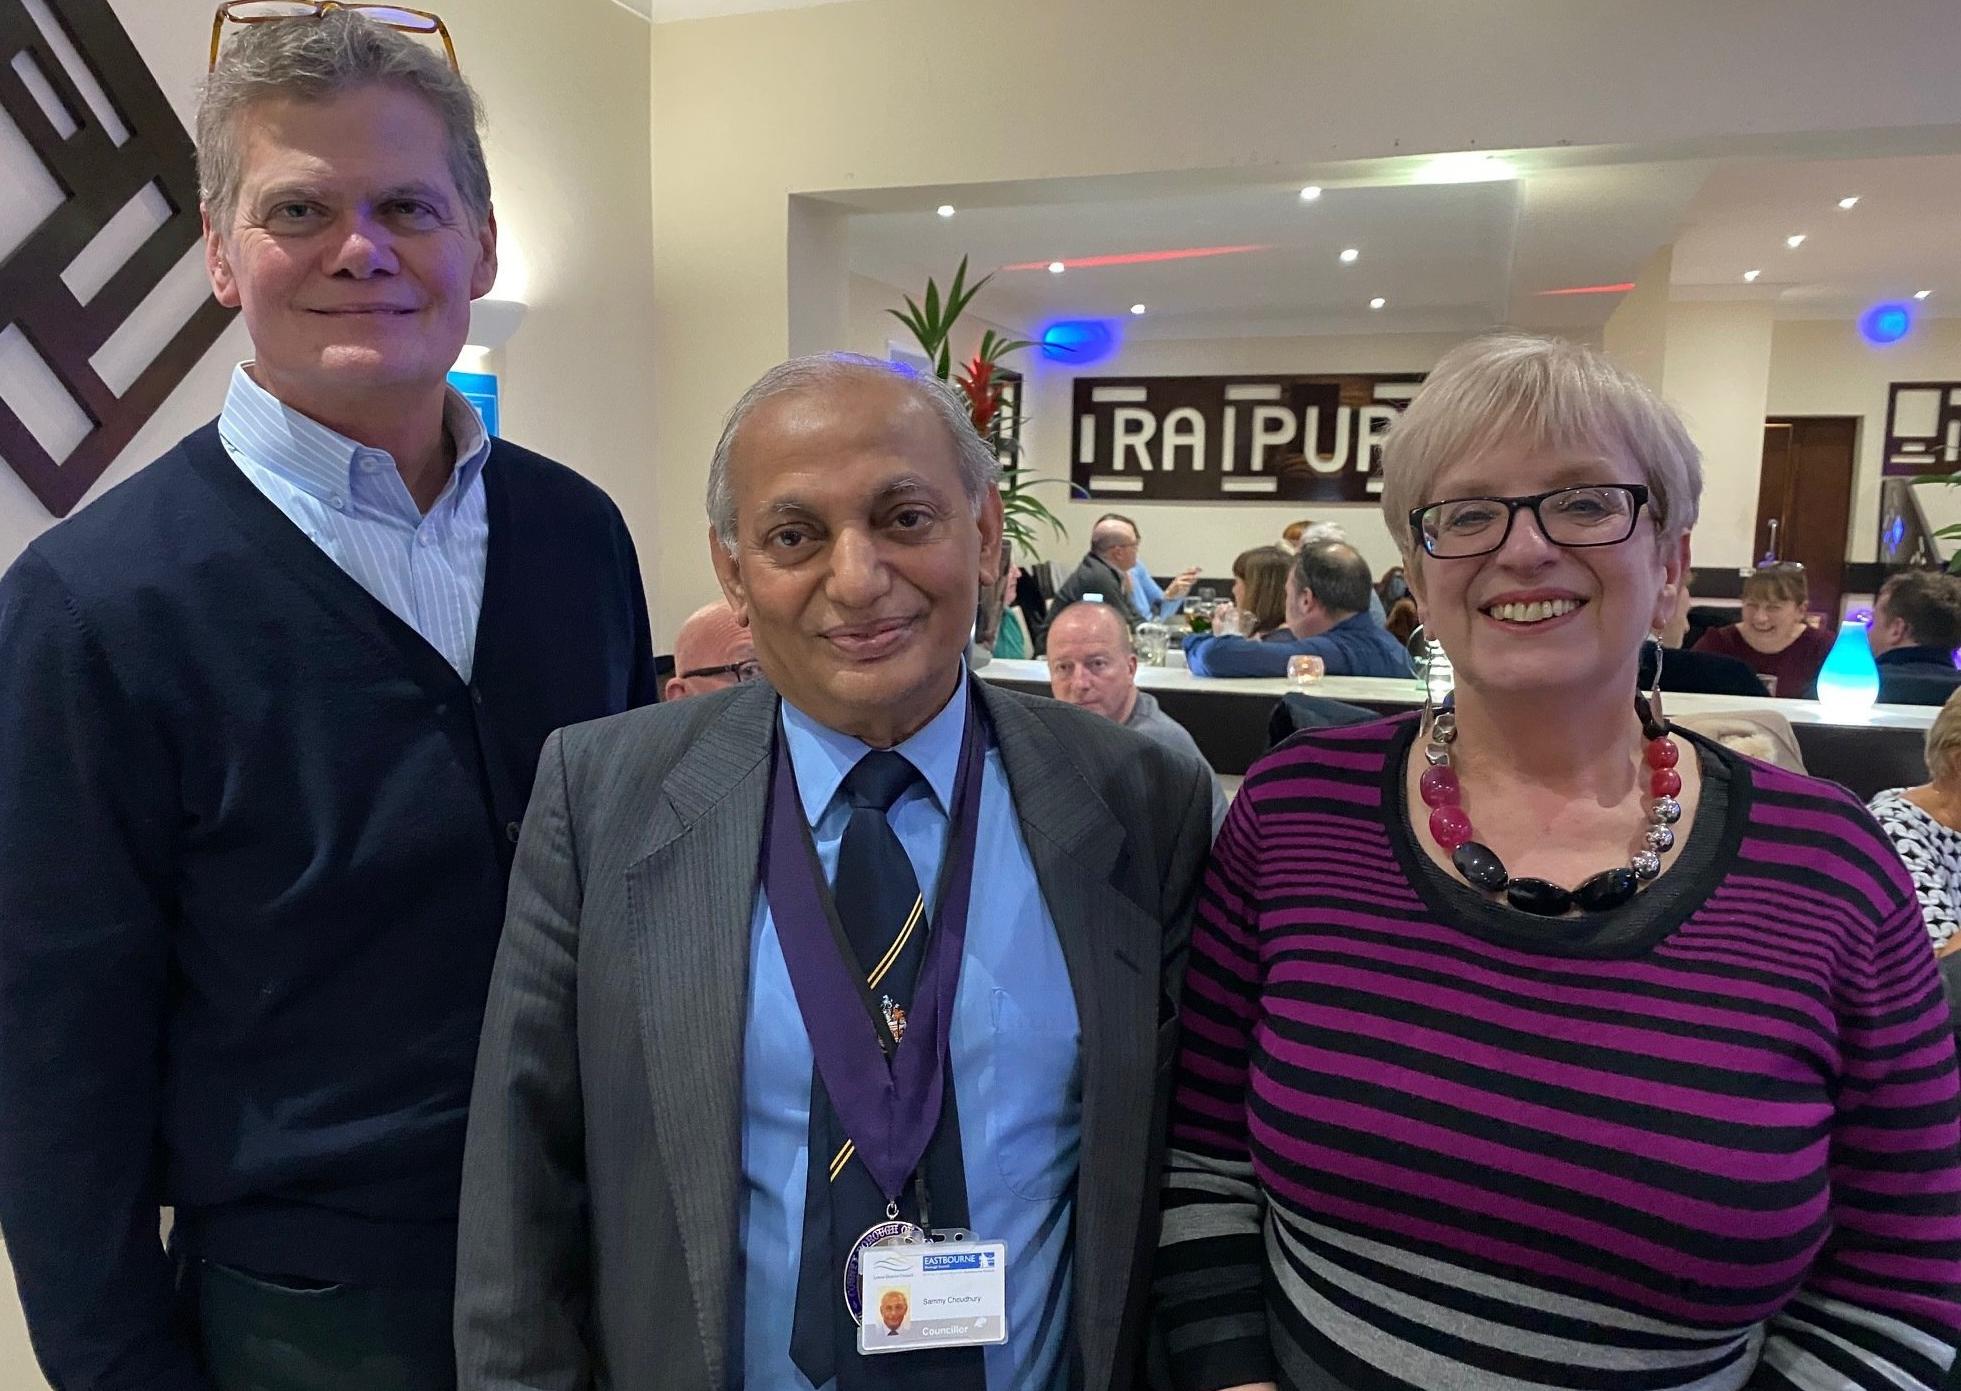 Raipur Indian restaurant held a fundraising evening for the Friends of Eastbourne Hospital. SUS-201202-094918001